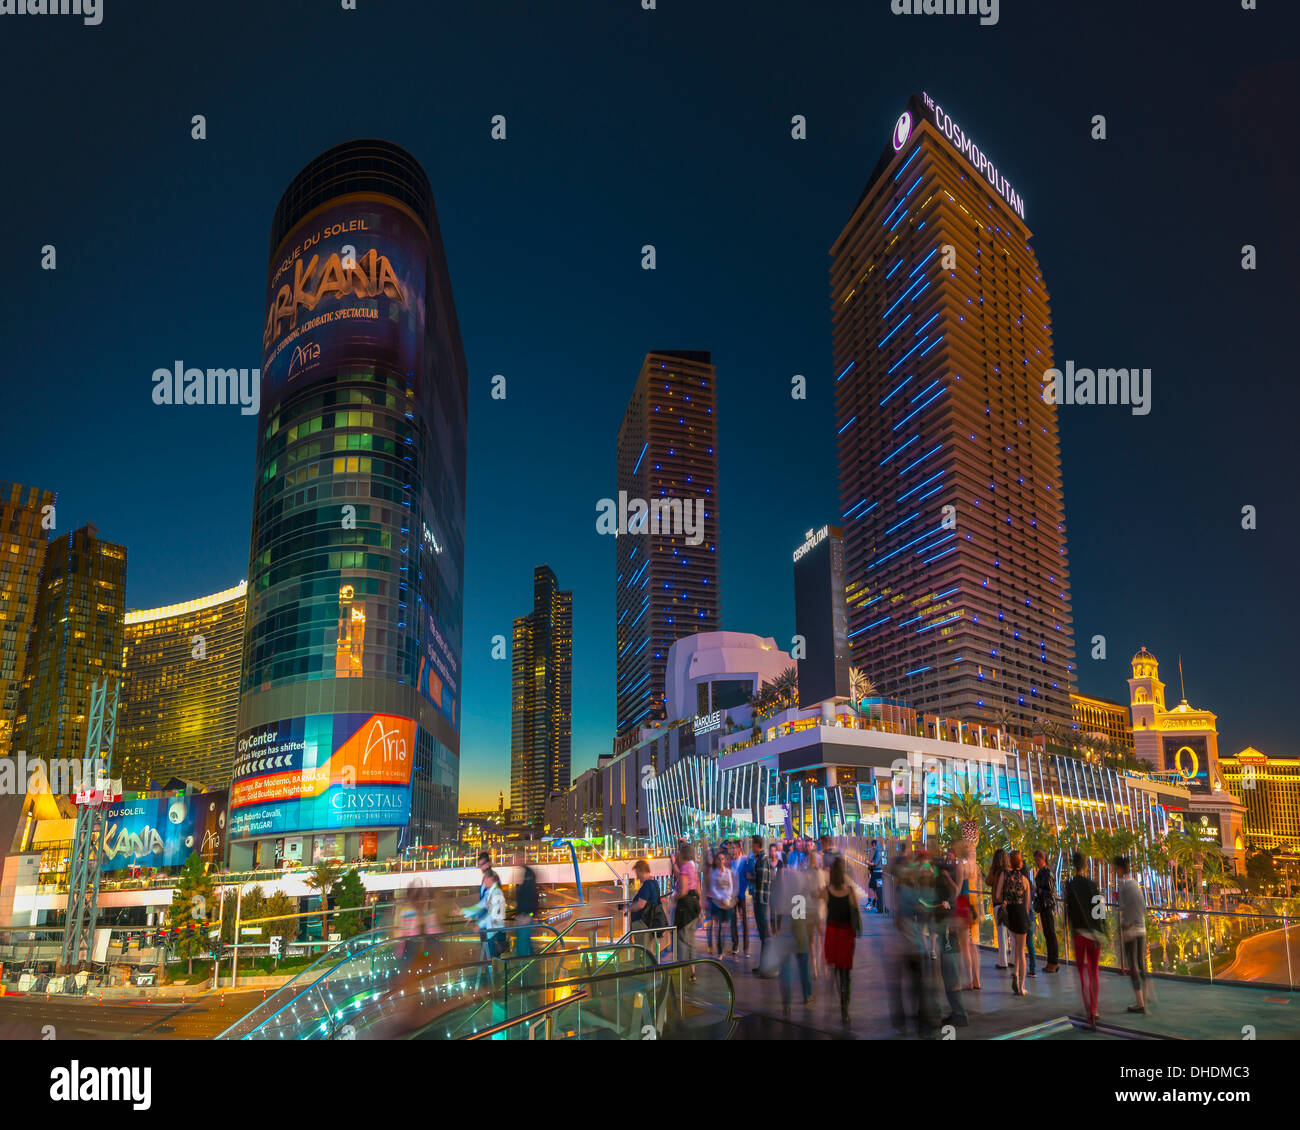 The Cosmopolitan on right and CityCenter on left, The Strip, Las Vegas, Nevada, United States of America, North America Stock Photo